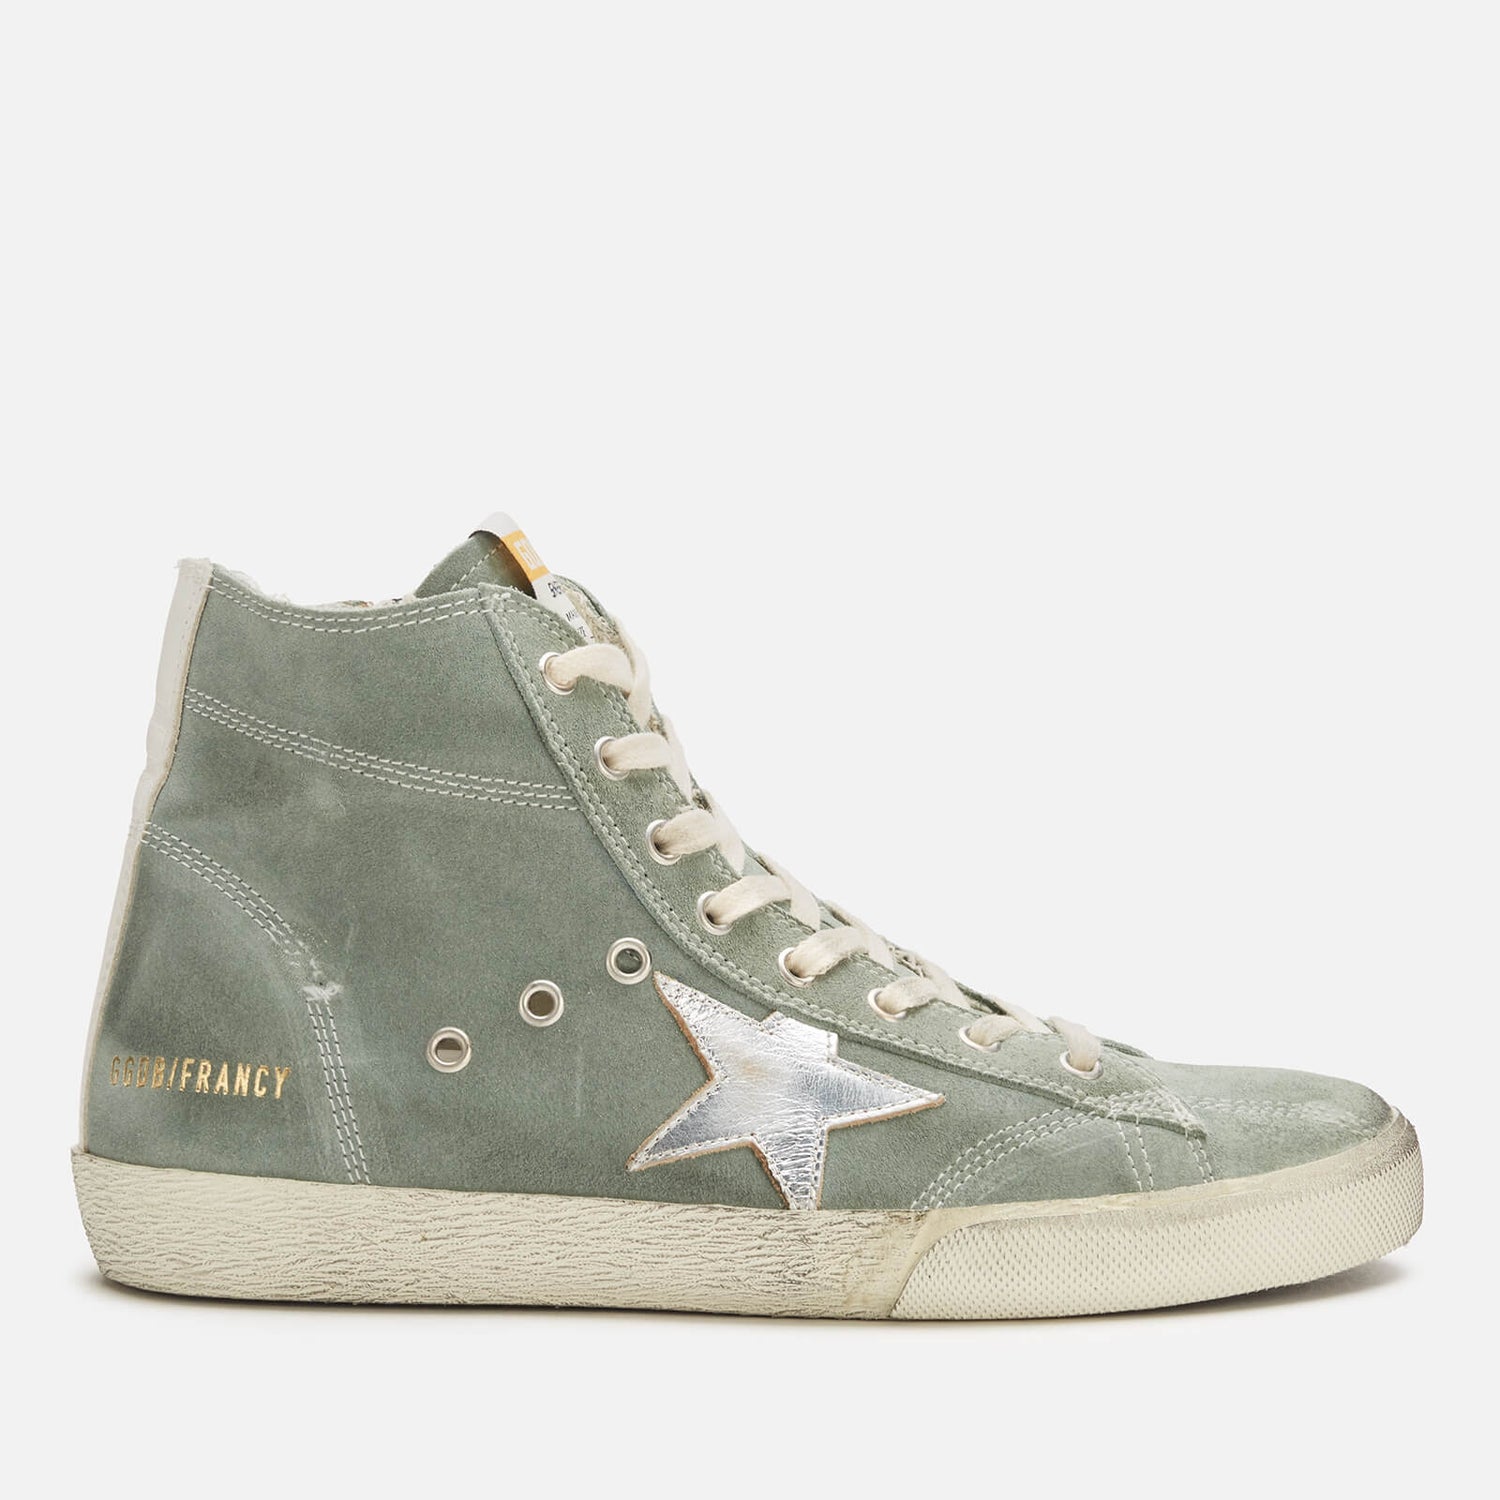 Golden Goose Women's Francy Suede Hi-Top Trainers - Military Green/Silver/White - UK 5